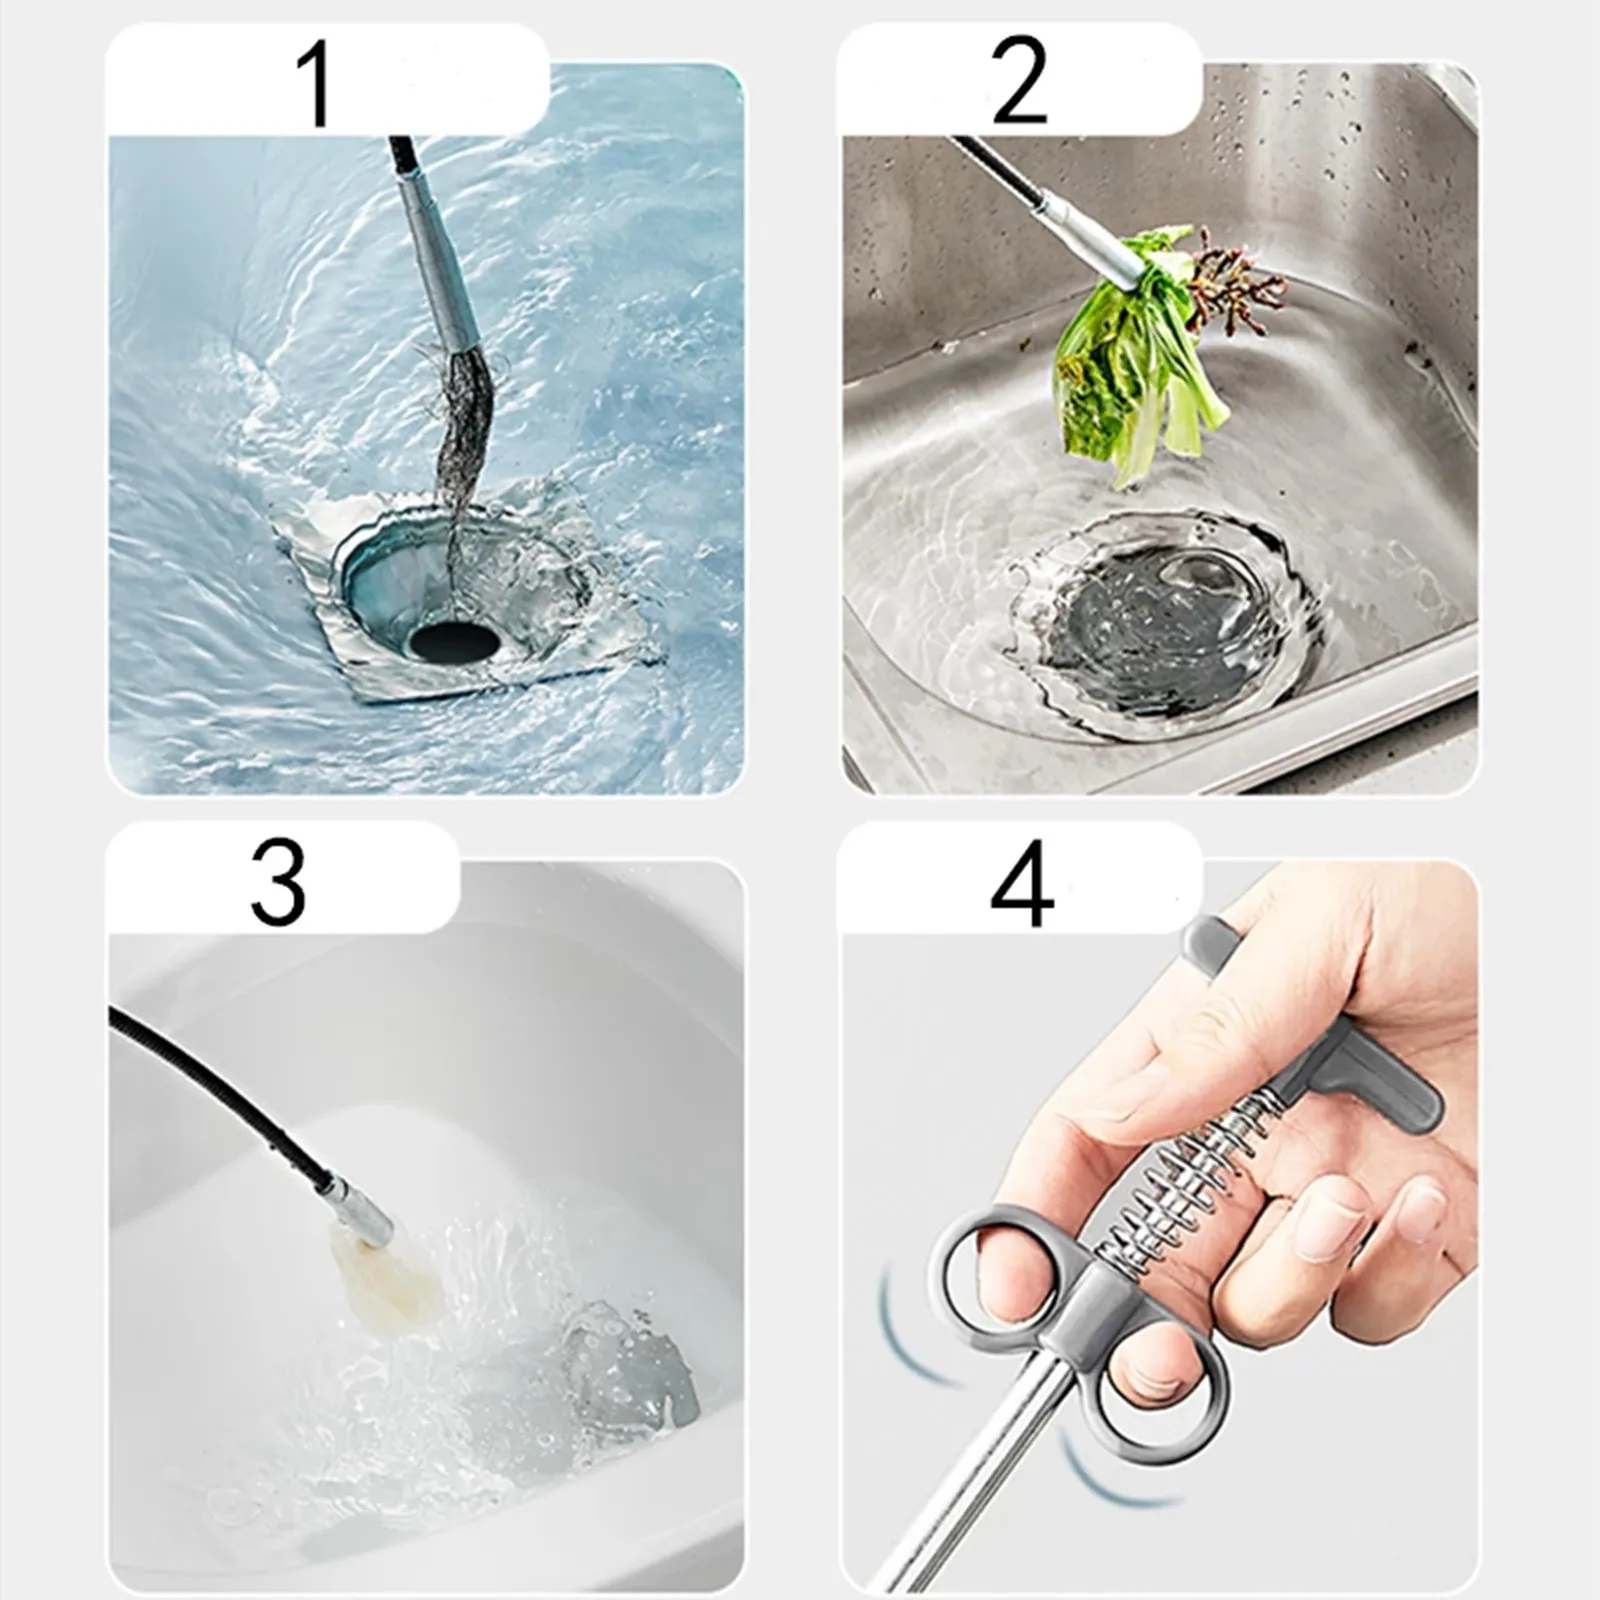 https://ae01.alicdn.com/kf/S87ba40296eed4a8eb90ff0dbebfb5214u/Sink-Drain-Clog-Remover-Grappling-Hook-Wire-Spring-Pipe-Dredging-Dredger-Sewer-Cleaning-Unblocker-Pipes-for.jpg